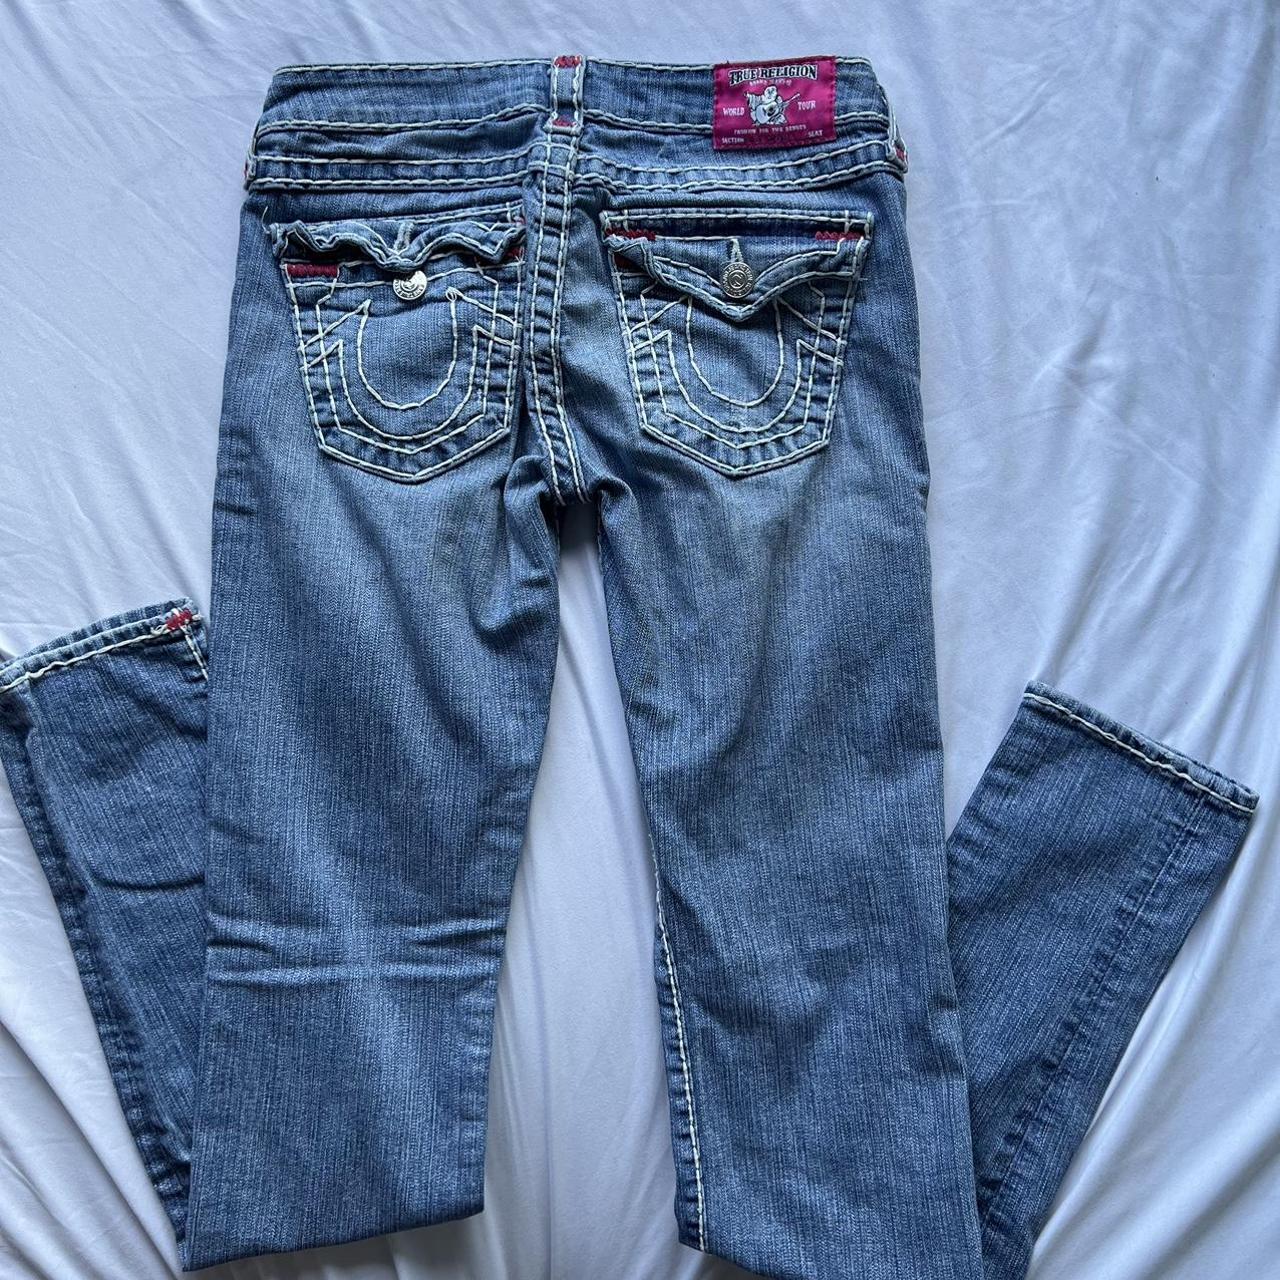 100% True religions jeans- jeans are in excellent... - Depop